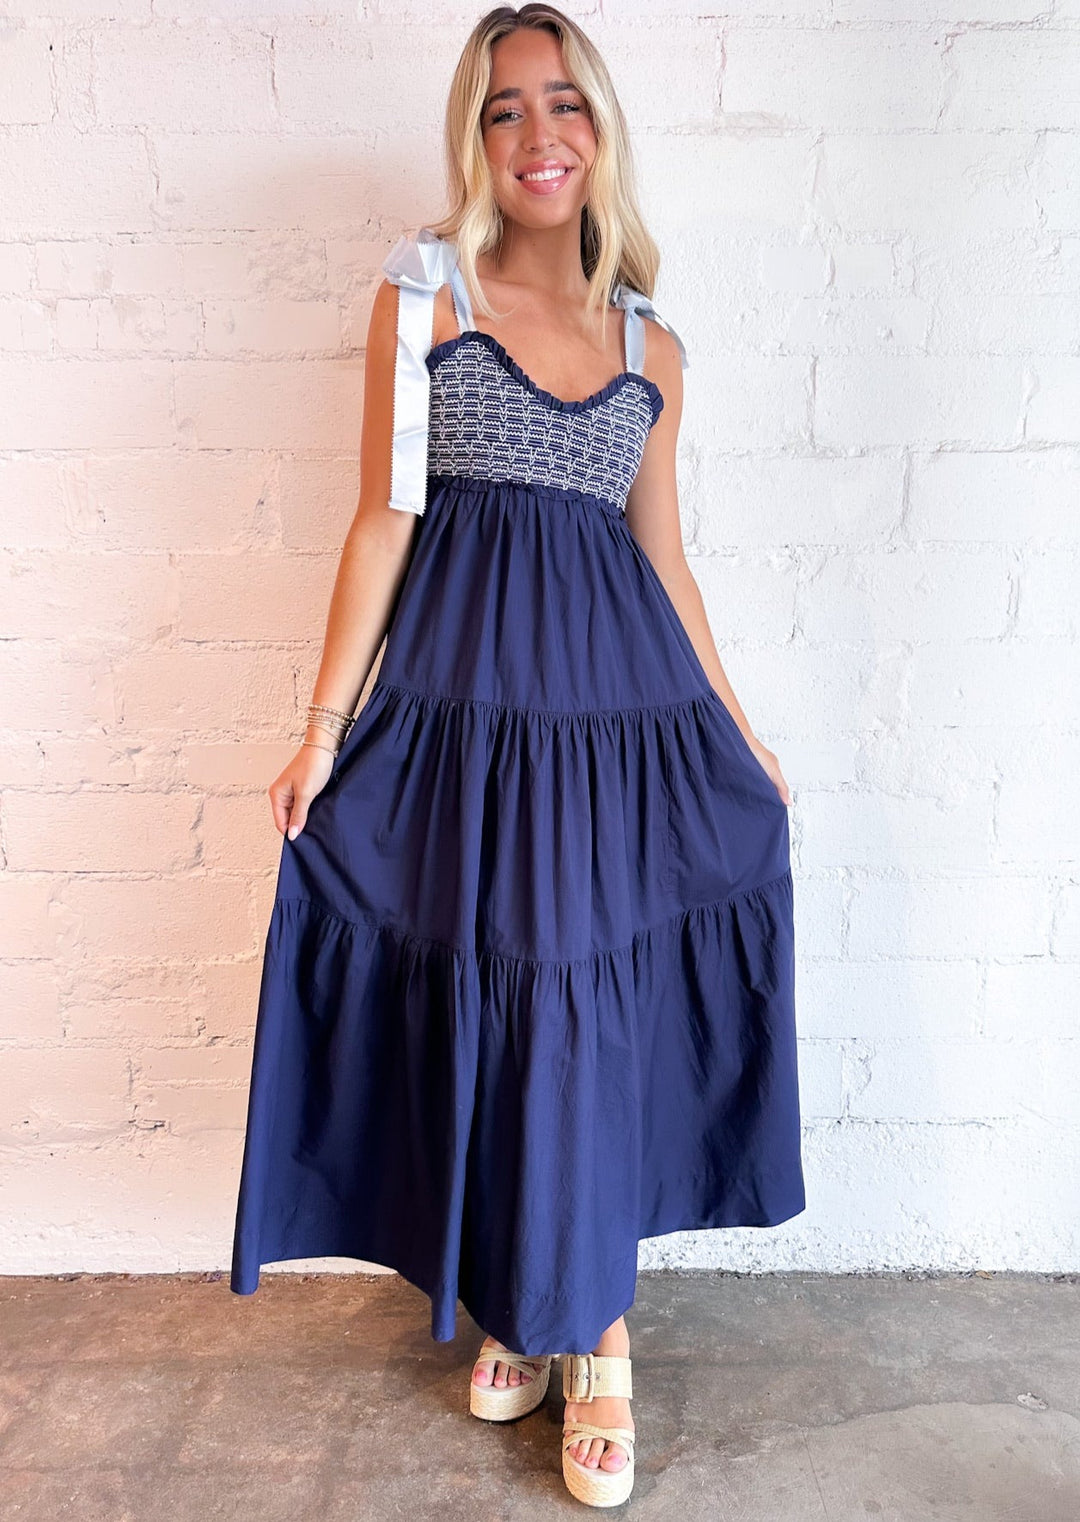 Free People Bluebell Solid Maxi Dress, Dresses, Free People, Adeline, dallas boutique, dallas texas, texas boutique, women's boutique dallas, adeline boutique, dallas boutique, trendy boutique, affordable boutique